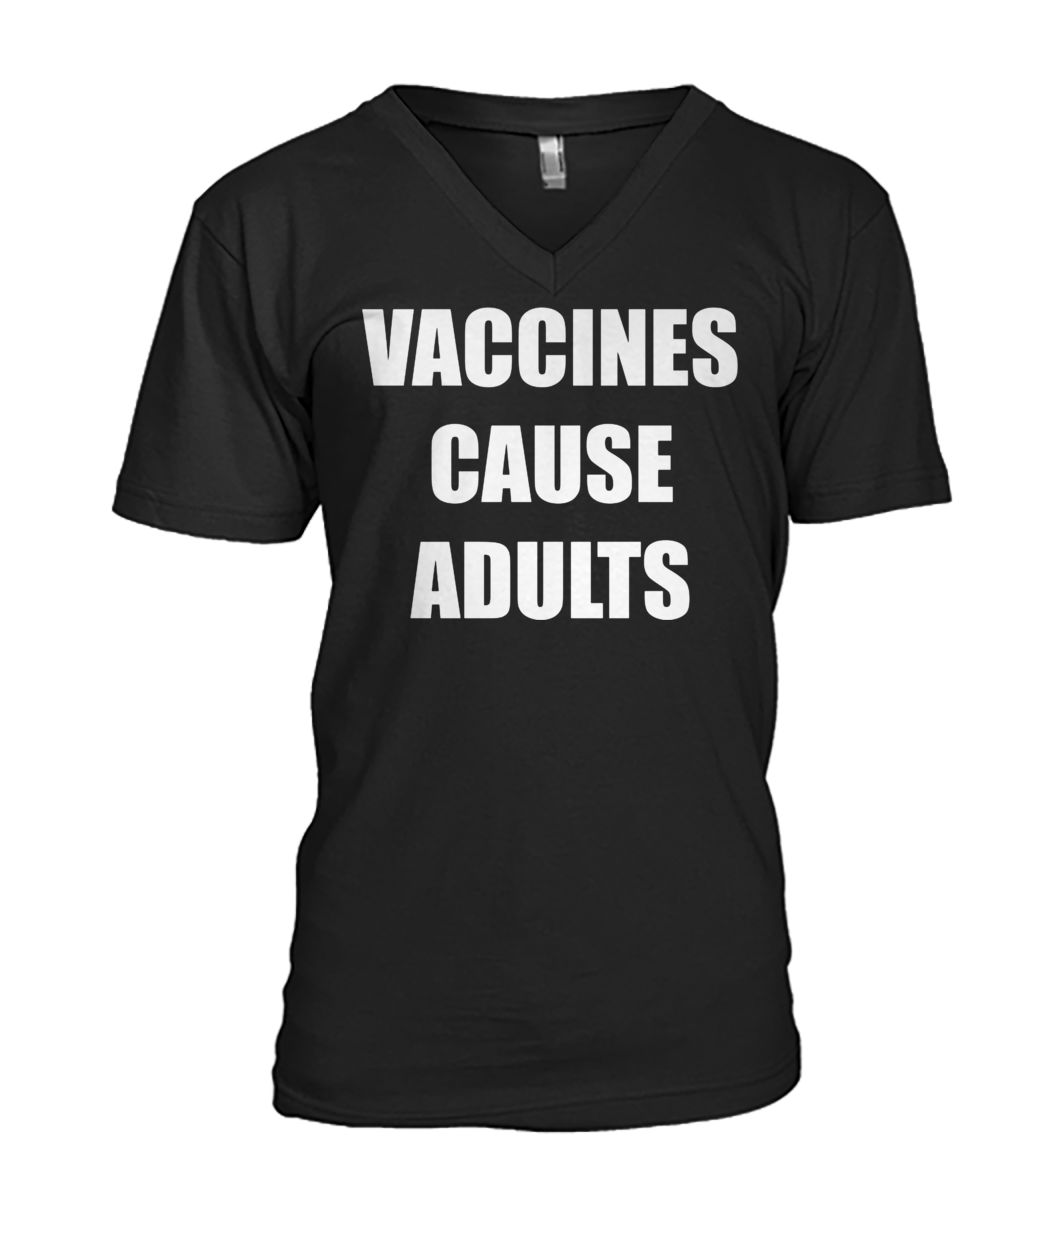 Justin trudeau vaccines cause adults mens v-neck